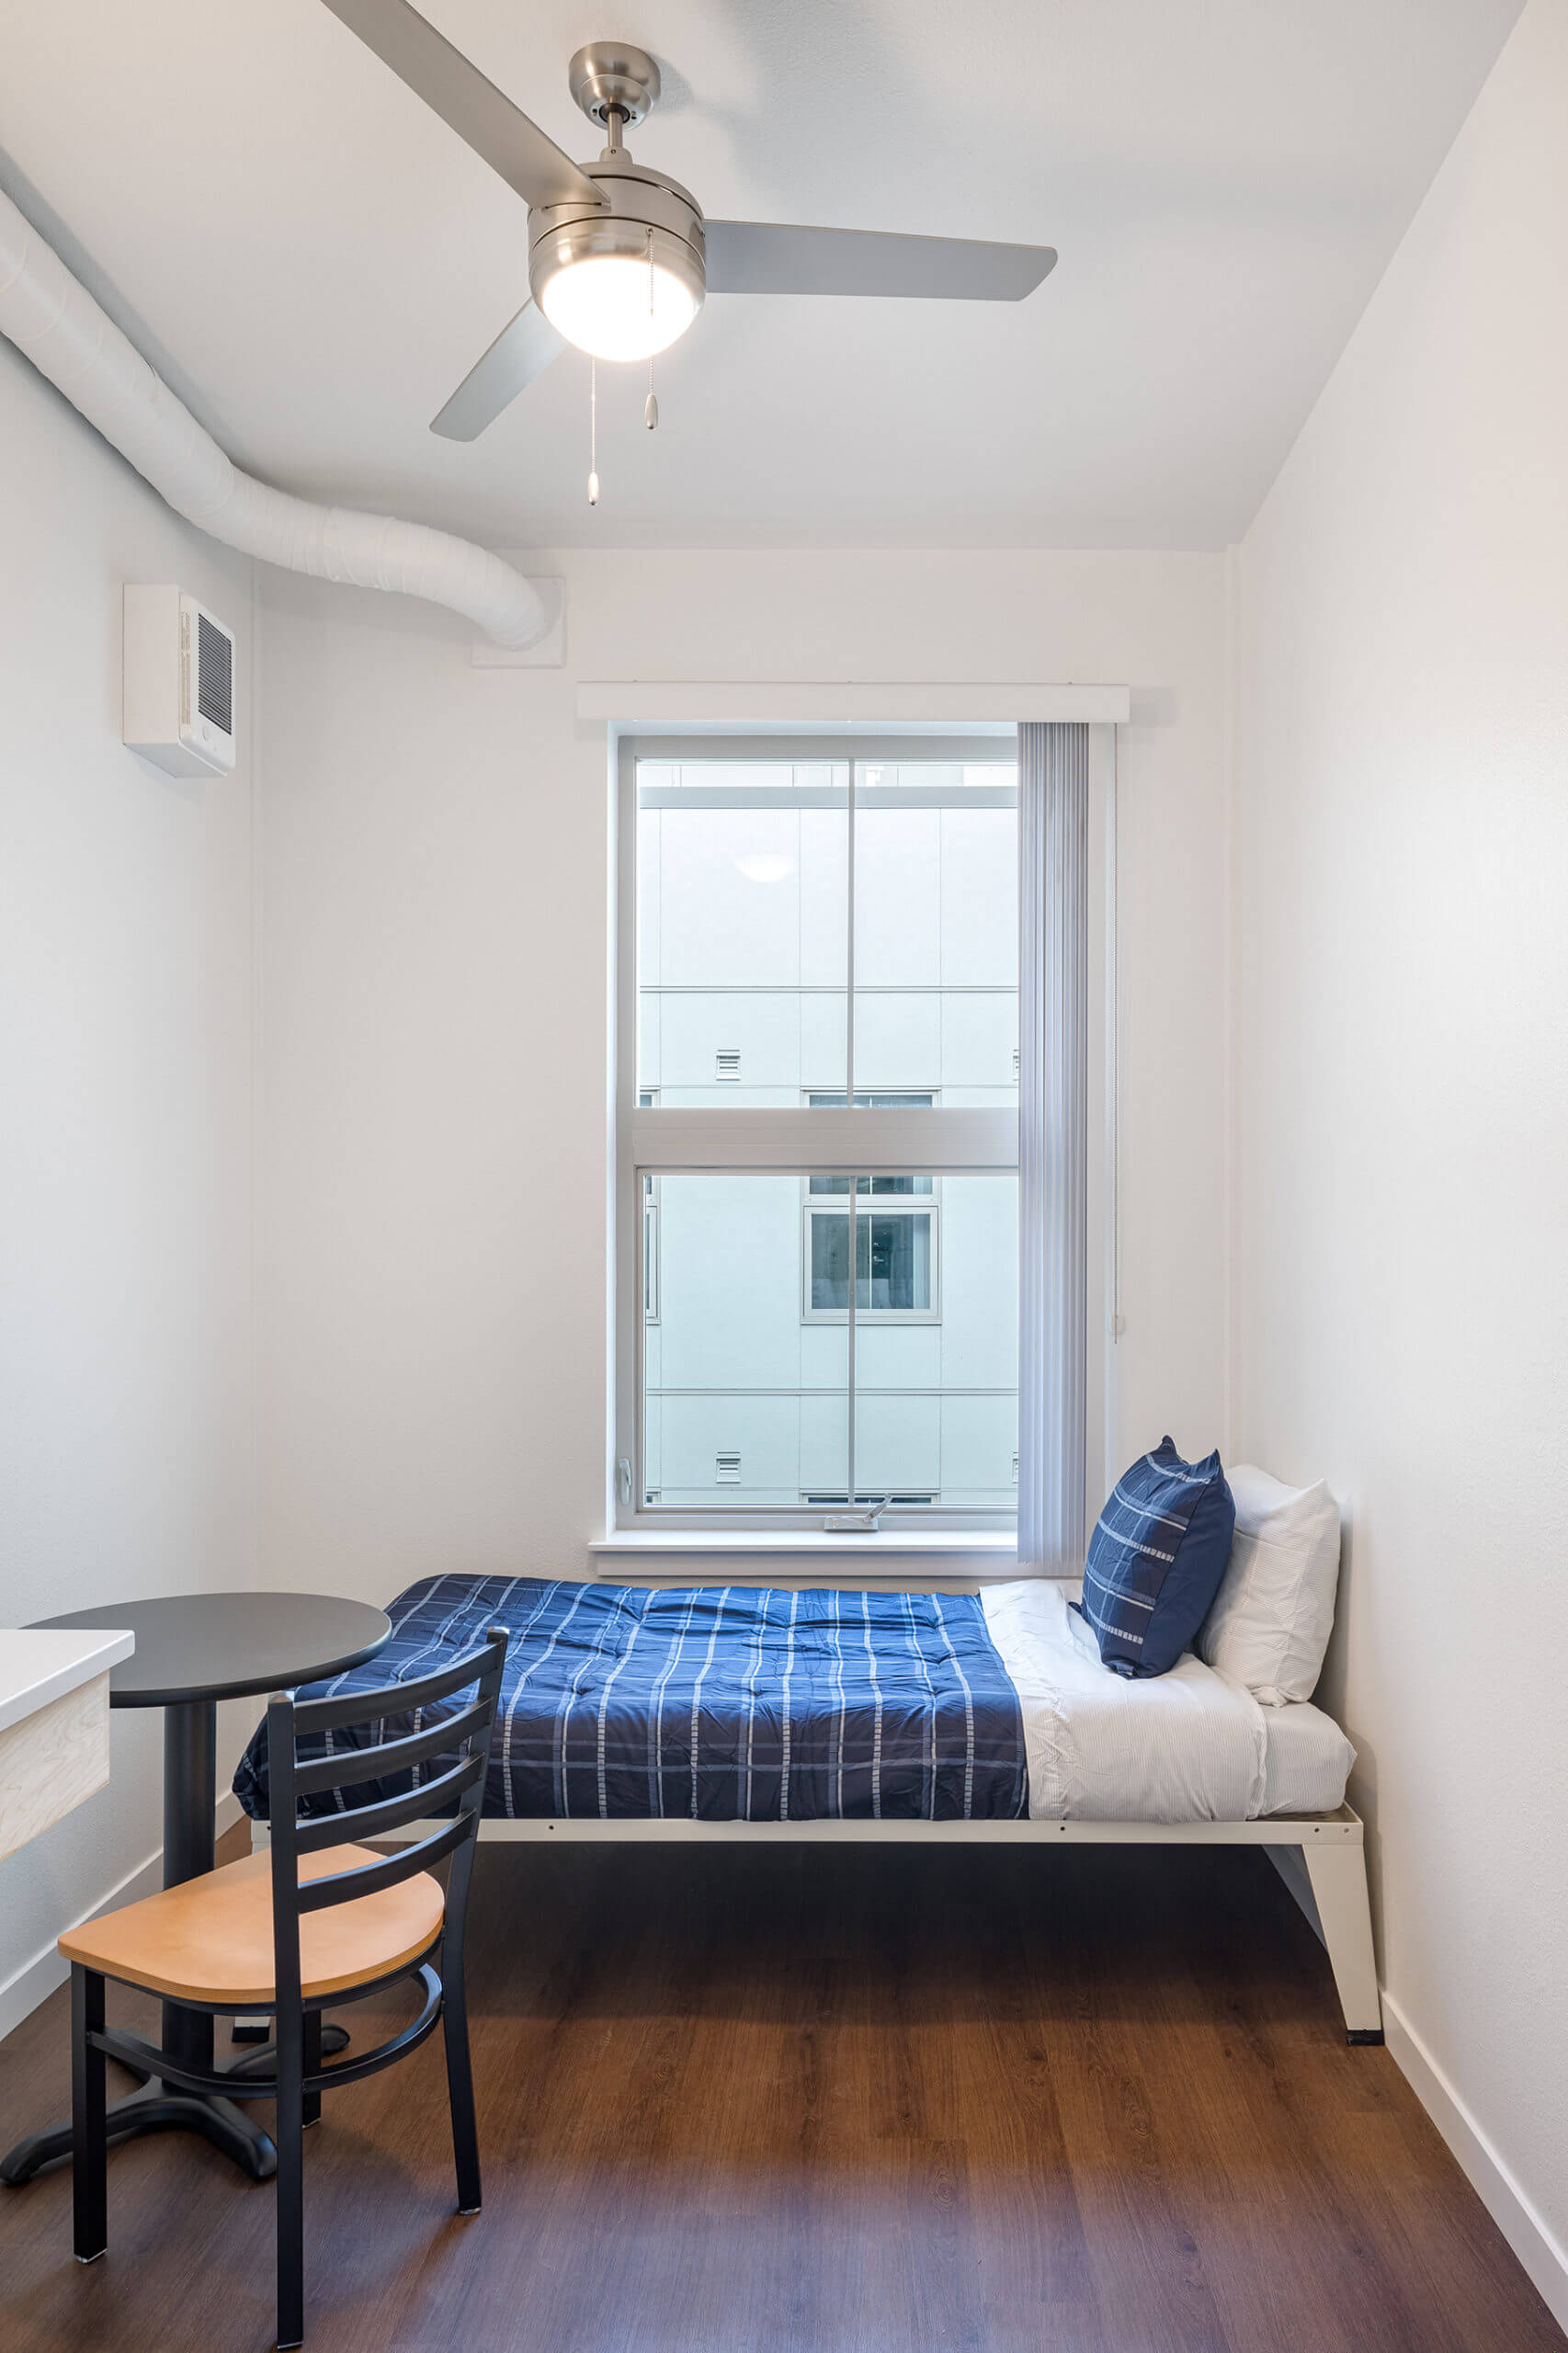 Interior of small studio apartment in the Henry Building